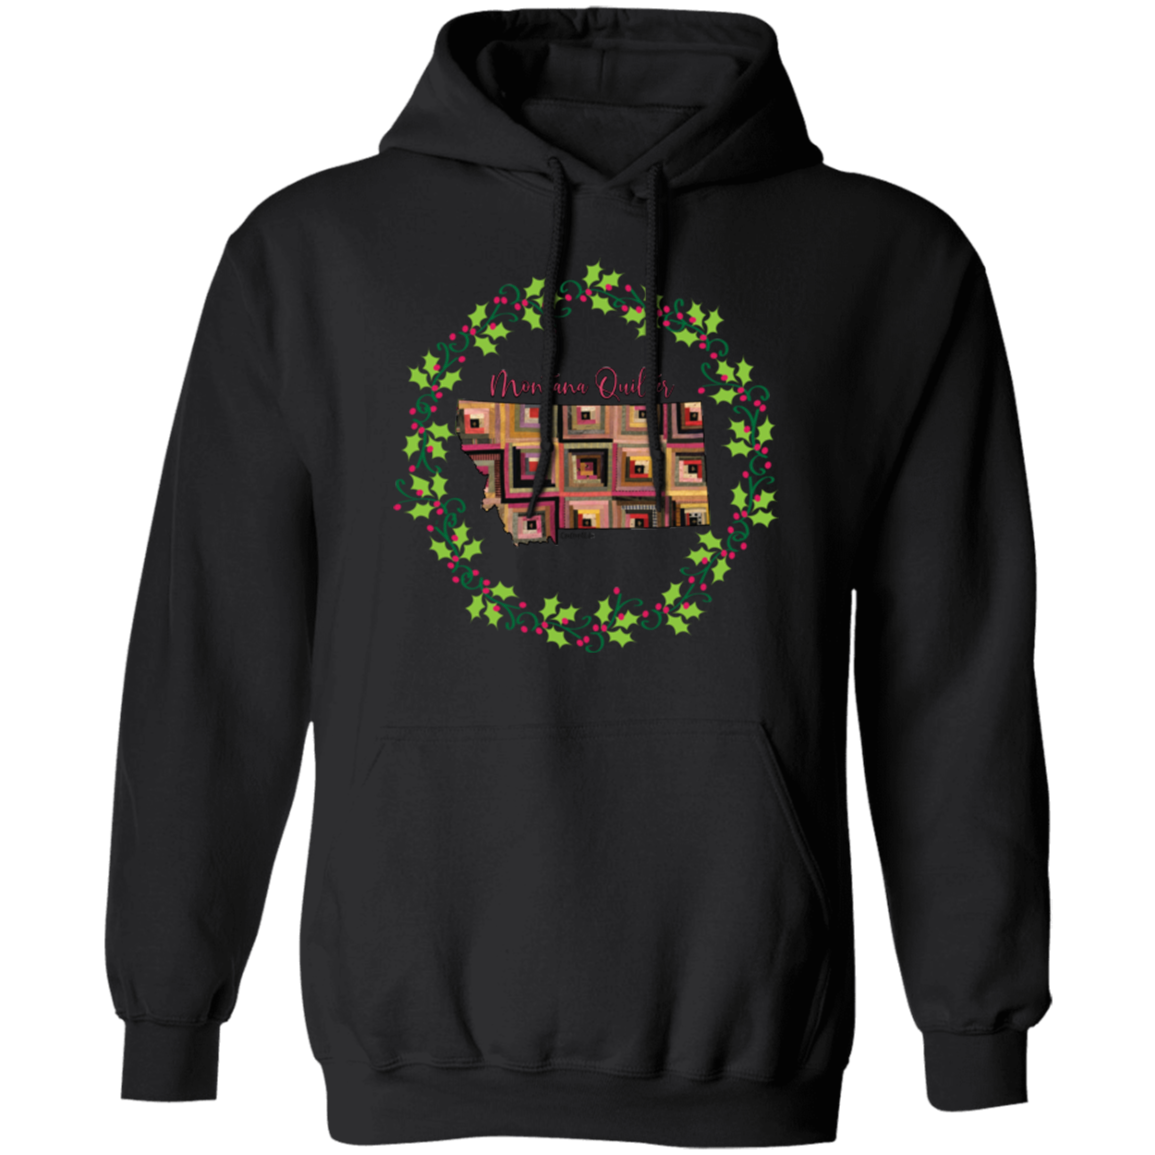 Montana Quilter Christmas Pullover Hoodie